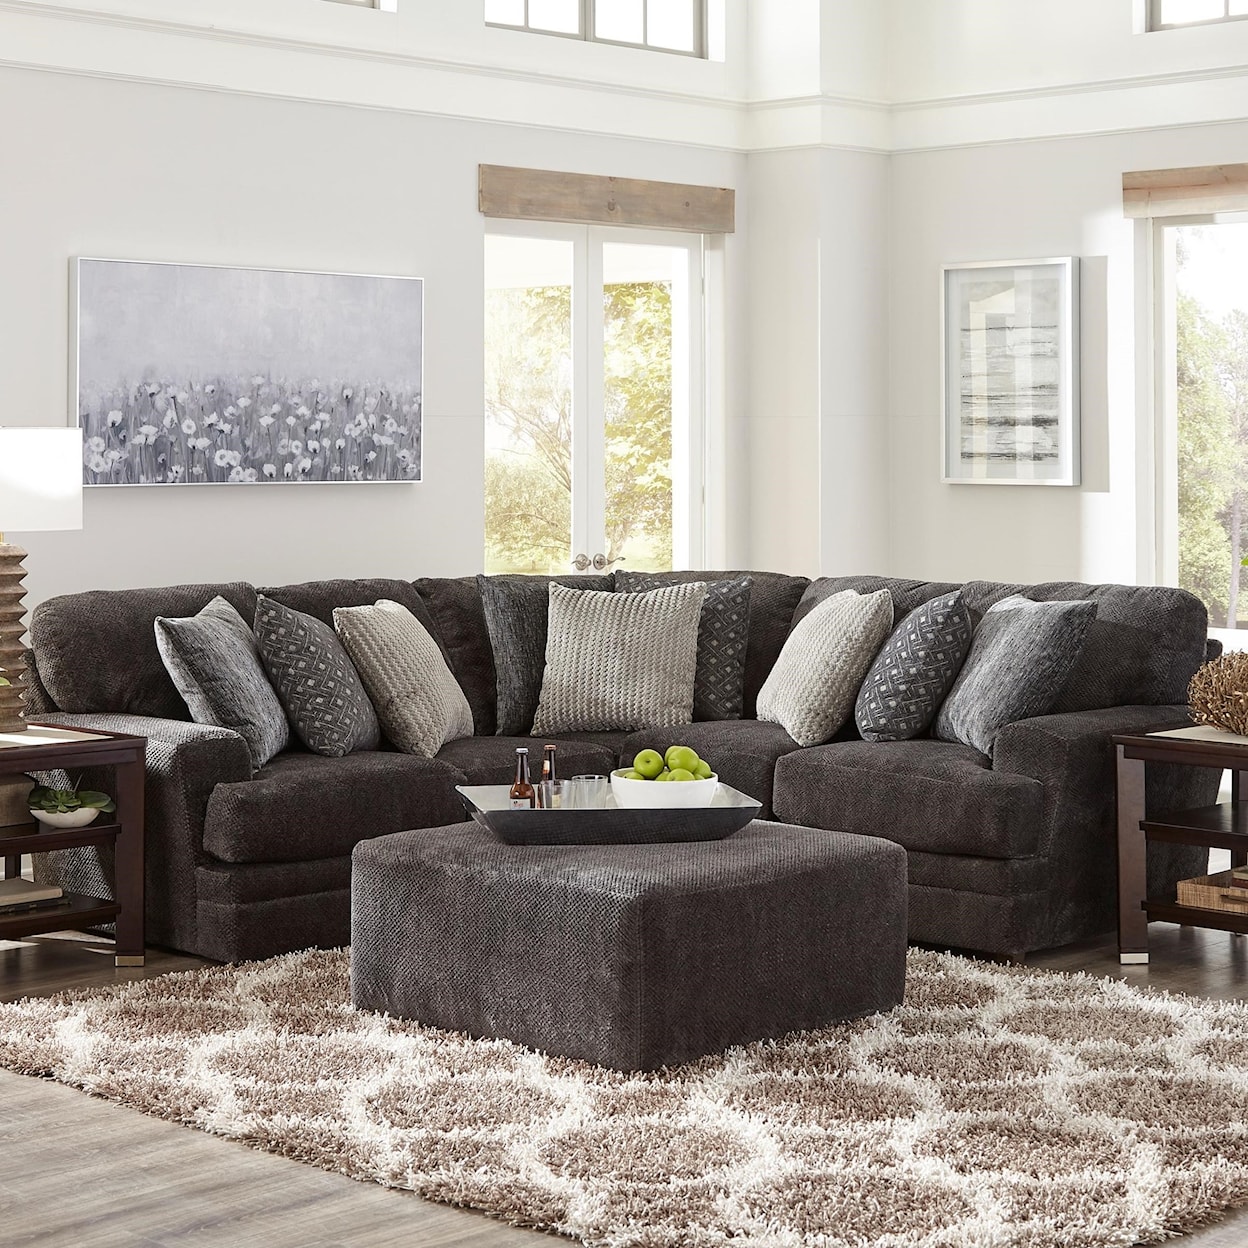 Jackson Furniture 4376 Mammoth 2pc Sectional and ottoman